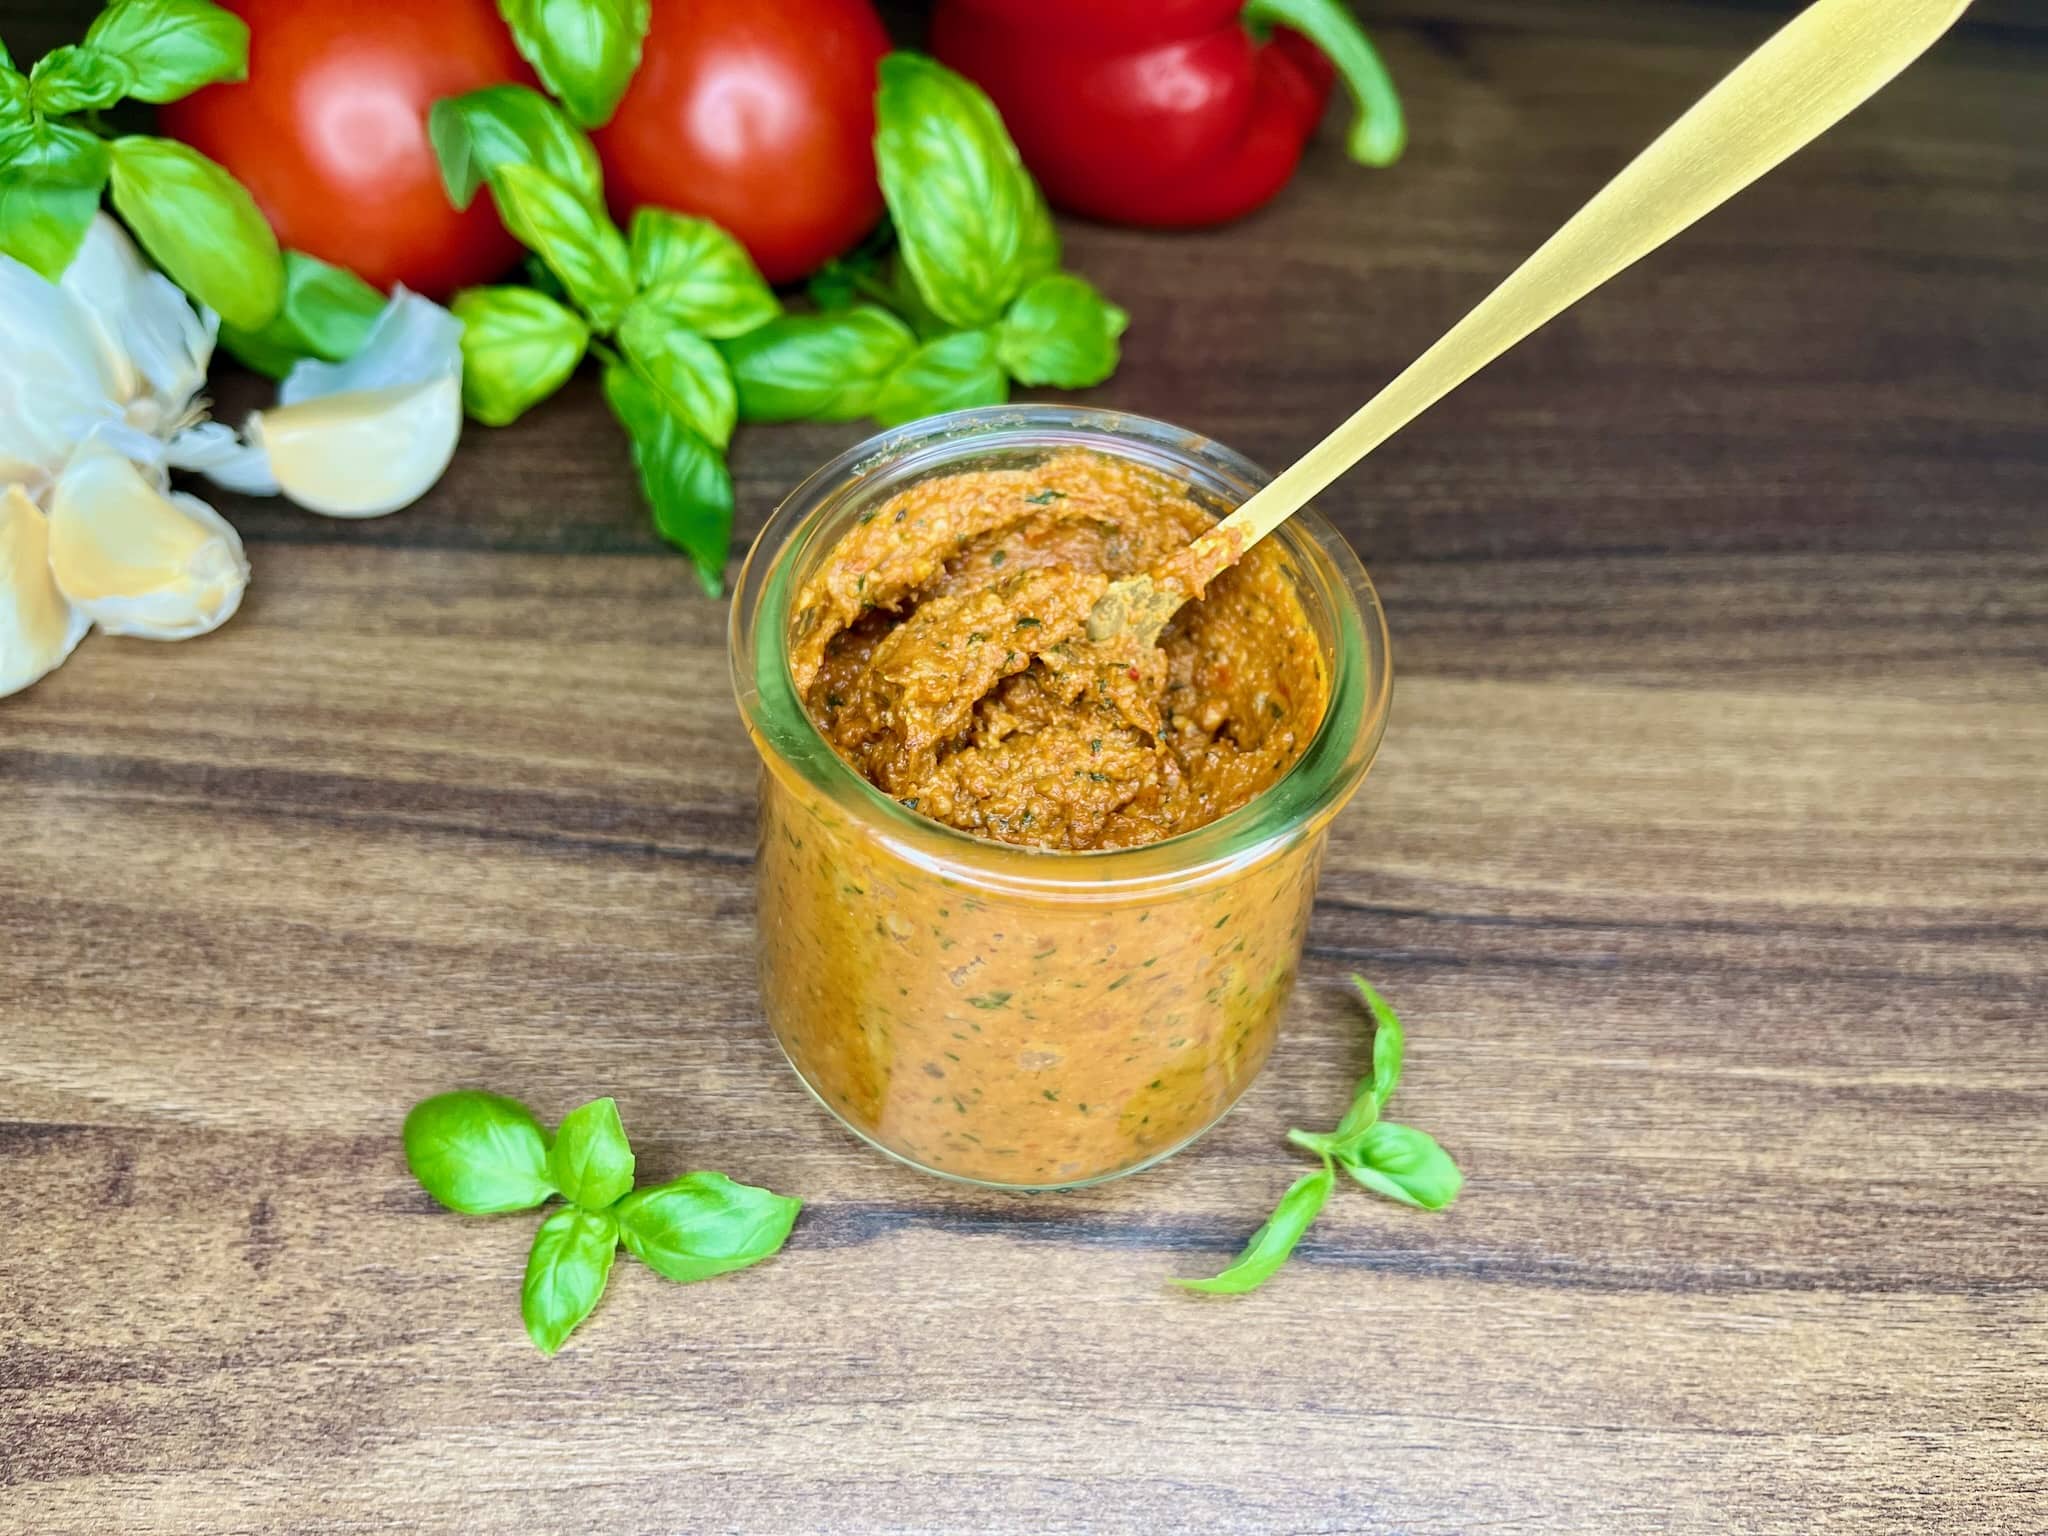 Just Perfect Red Pesto